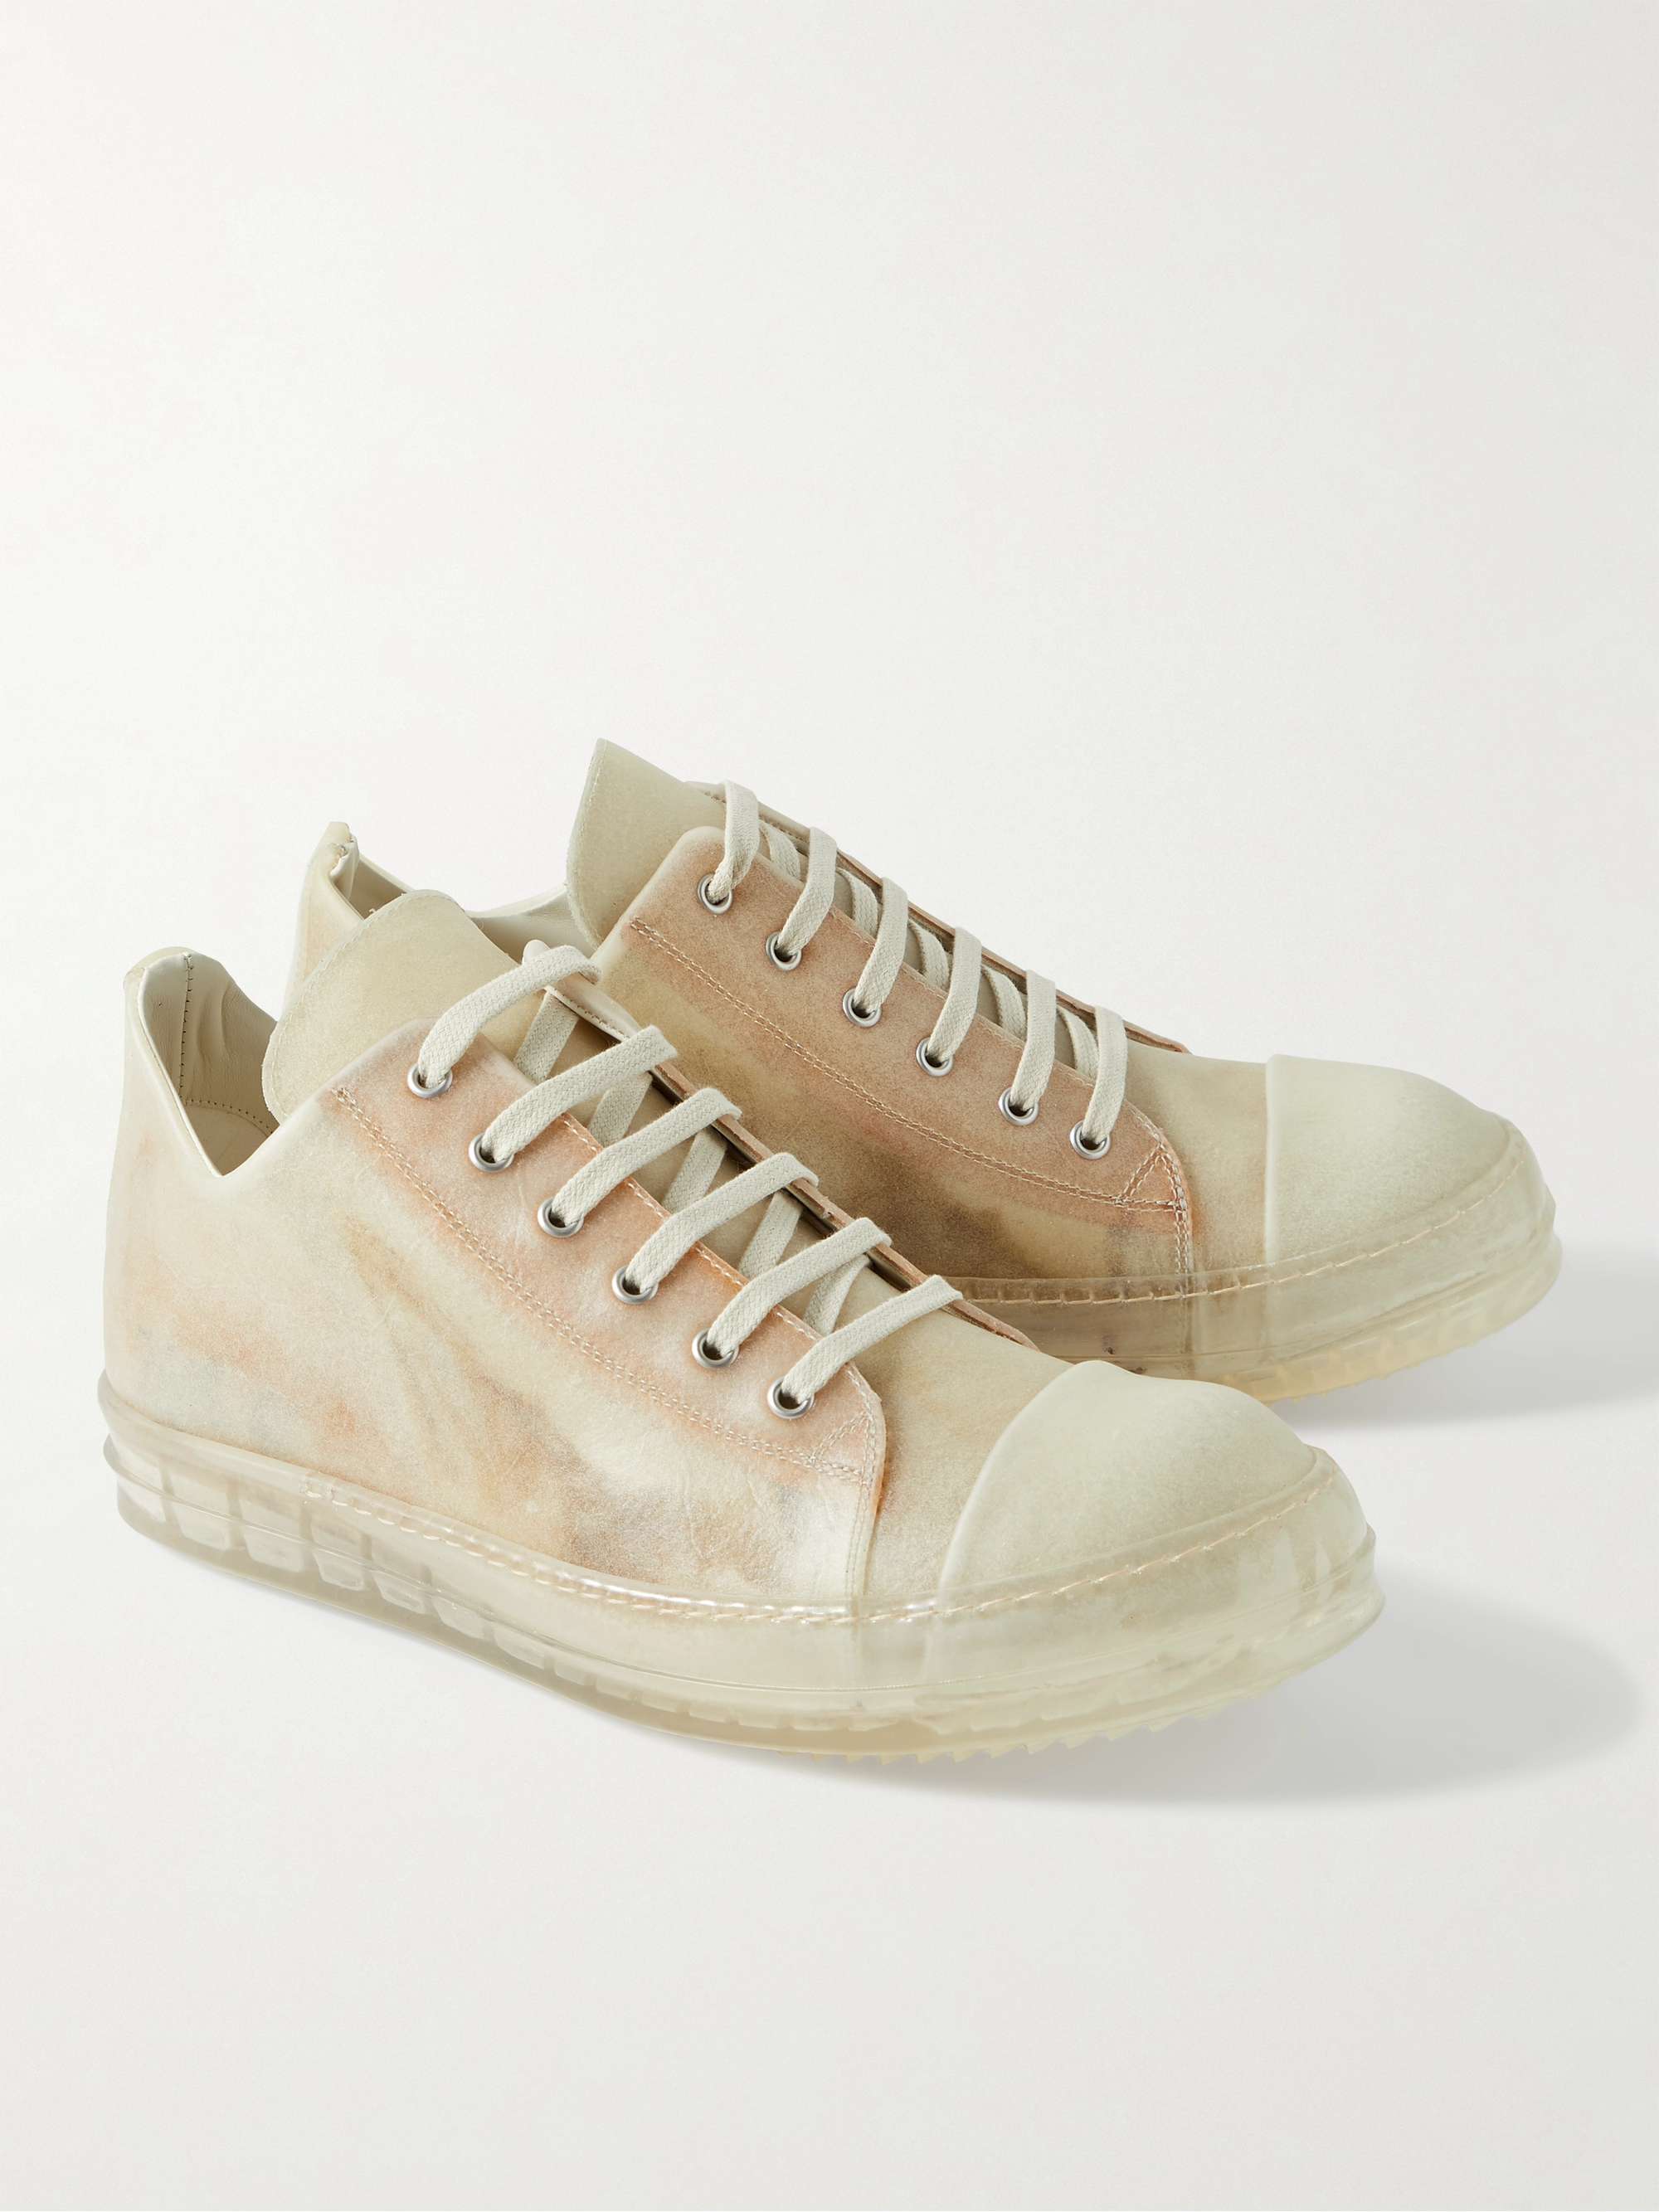 RICK OWENS Leather-Trimmed Rubber Sneakers